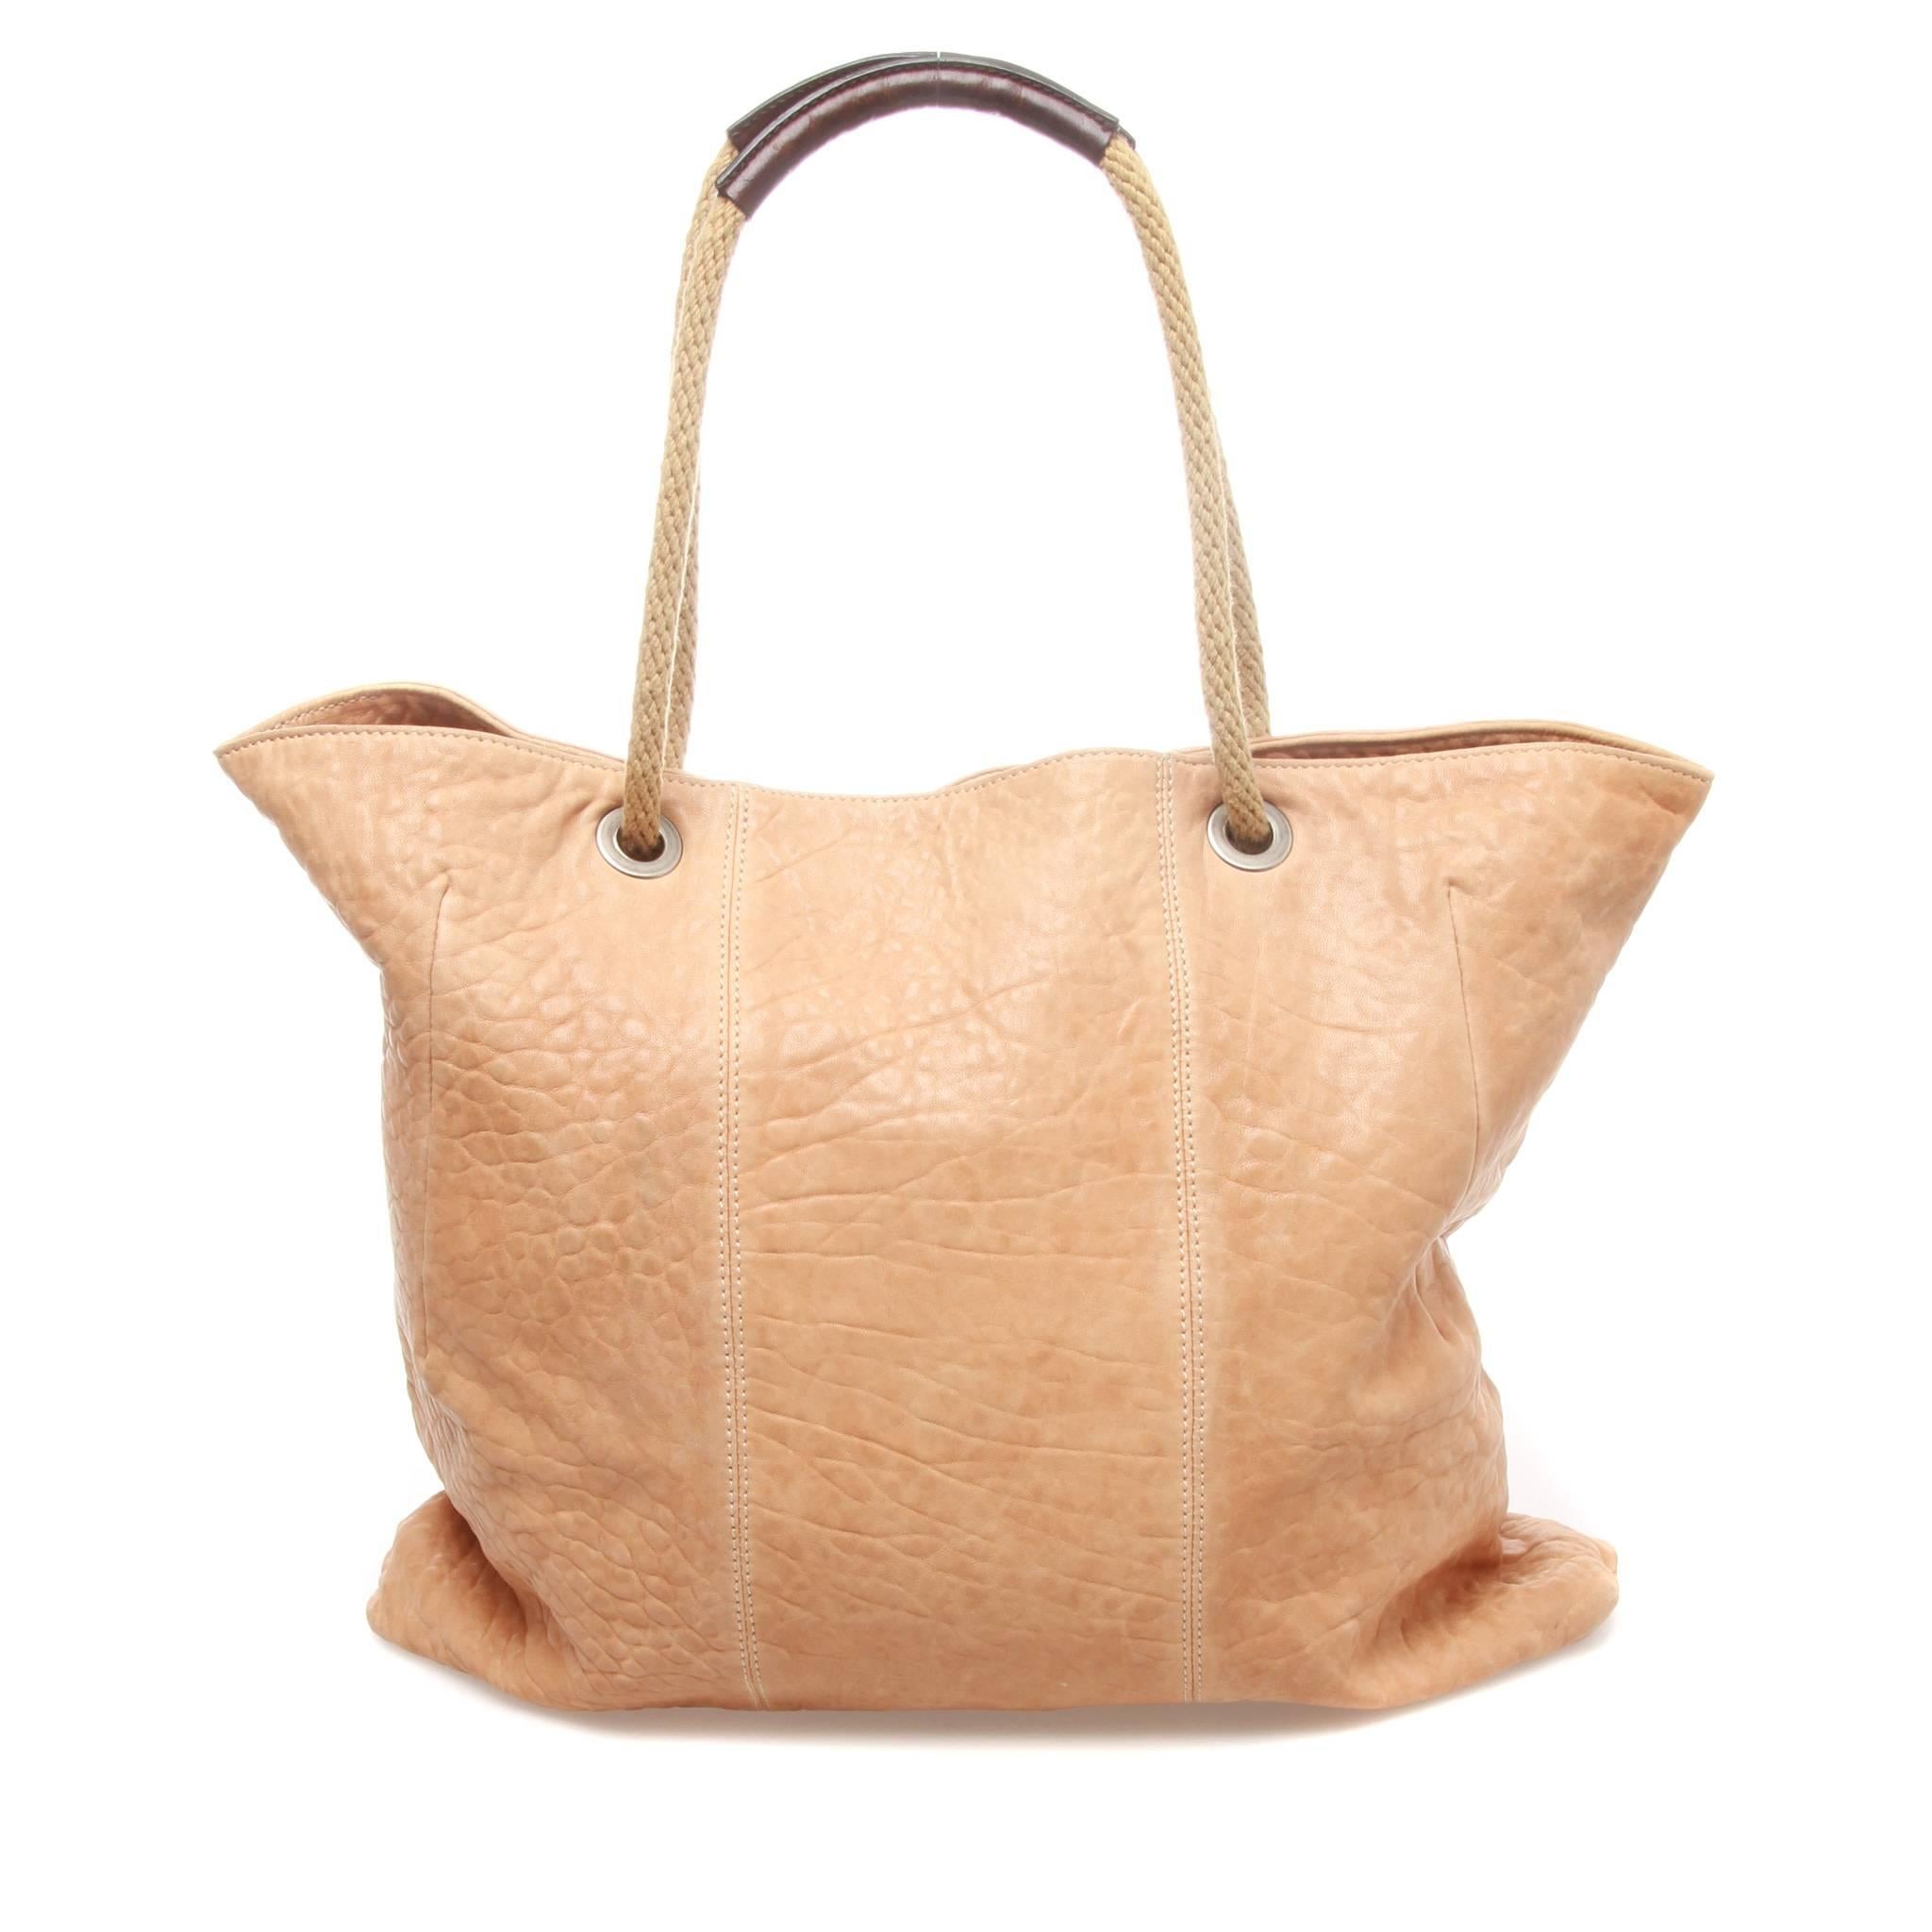 	MARNI Beige Leather Shopping Tote In Good Condition For Sale In Melbourne, Victoria